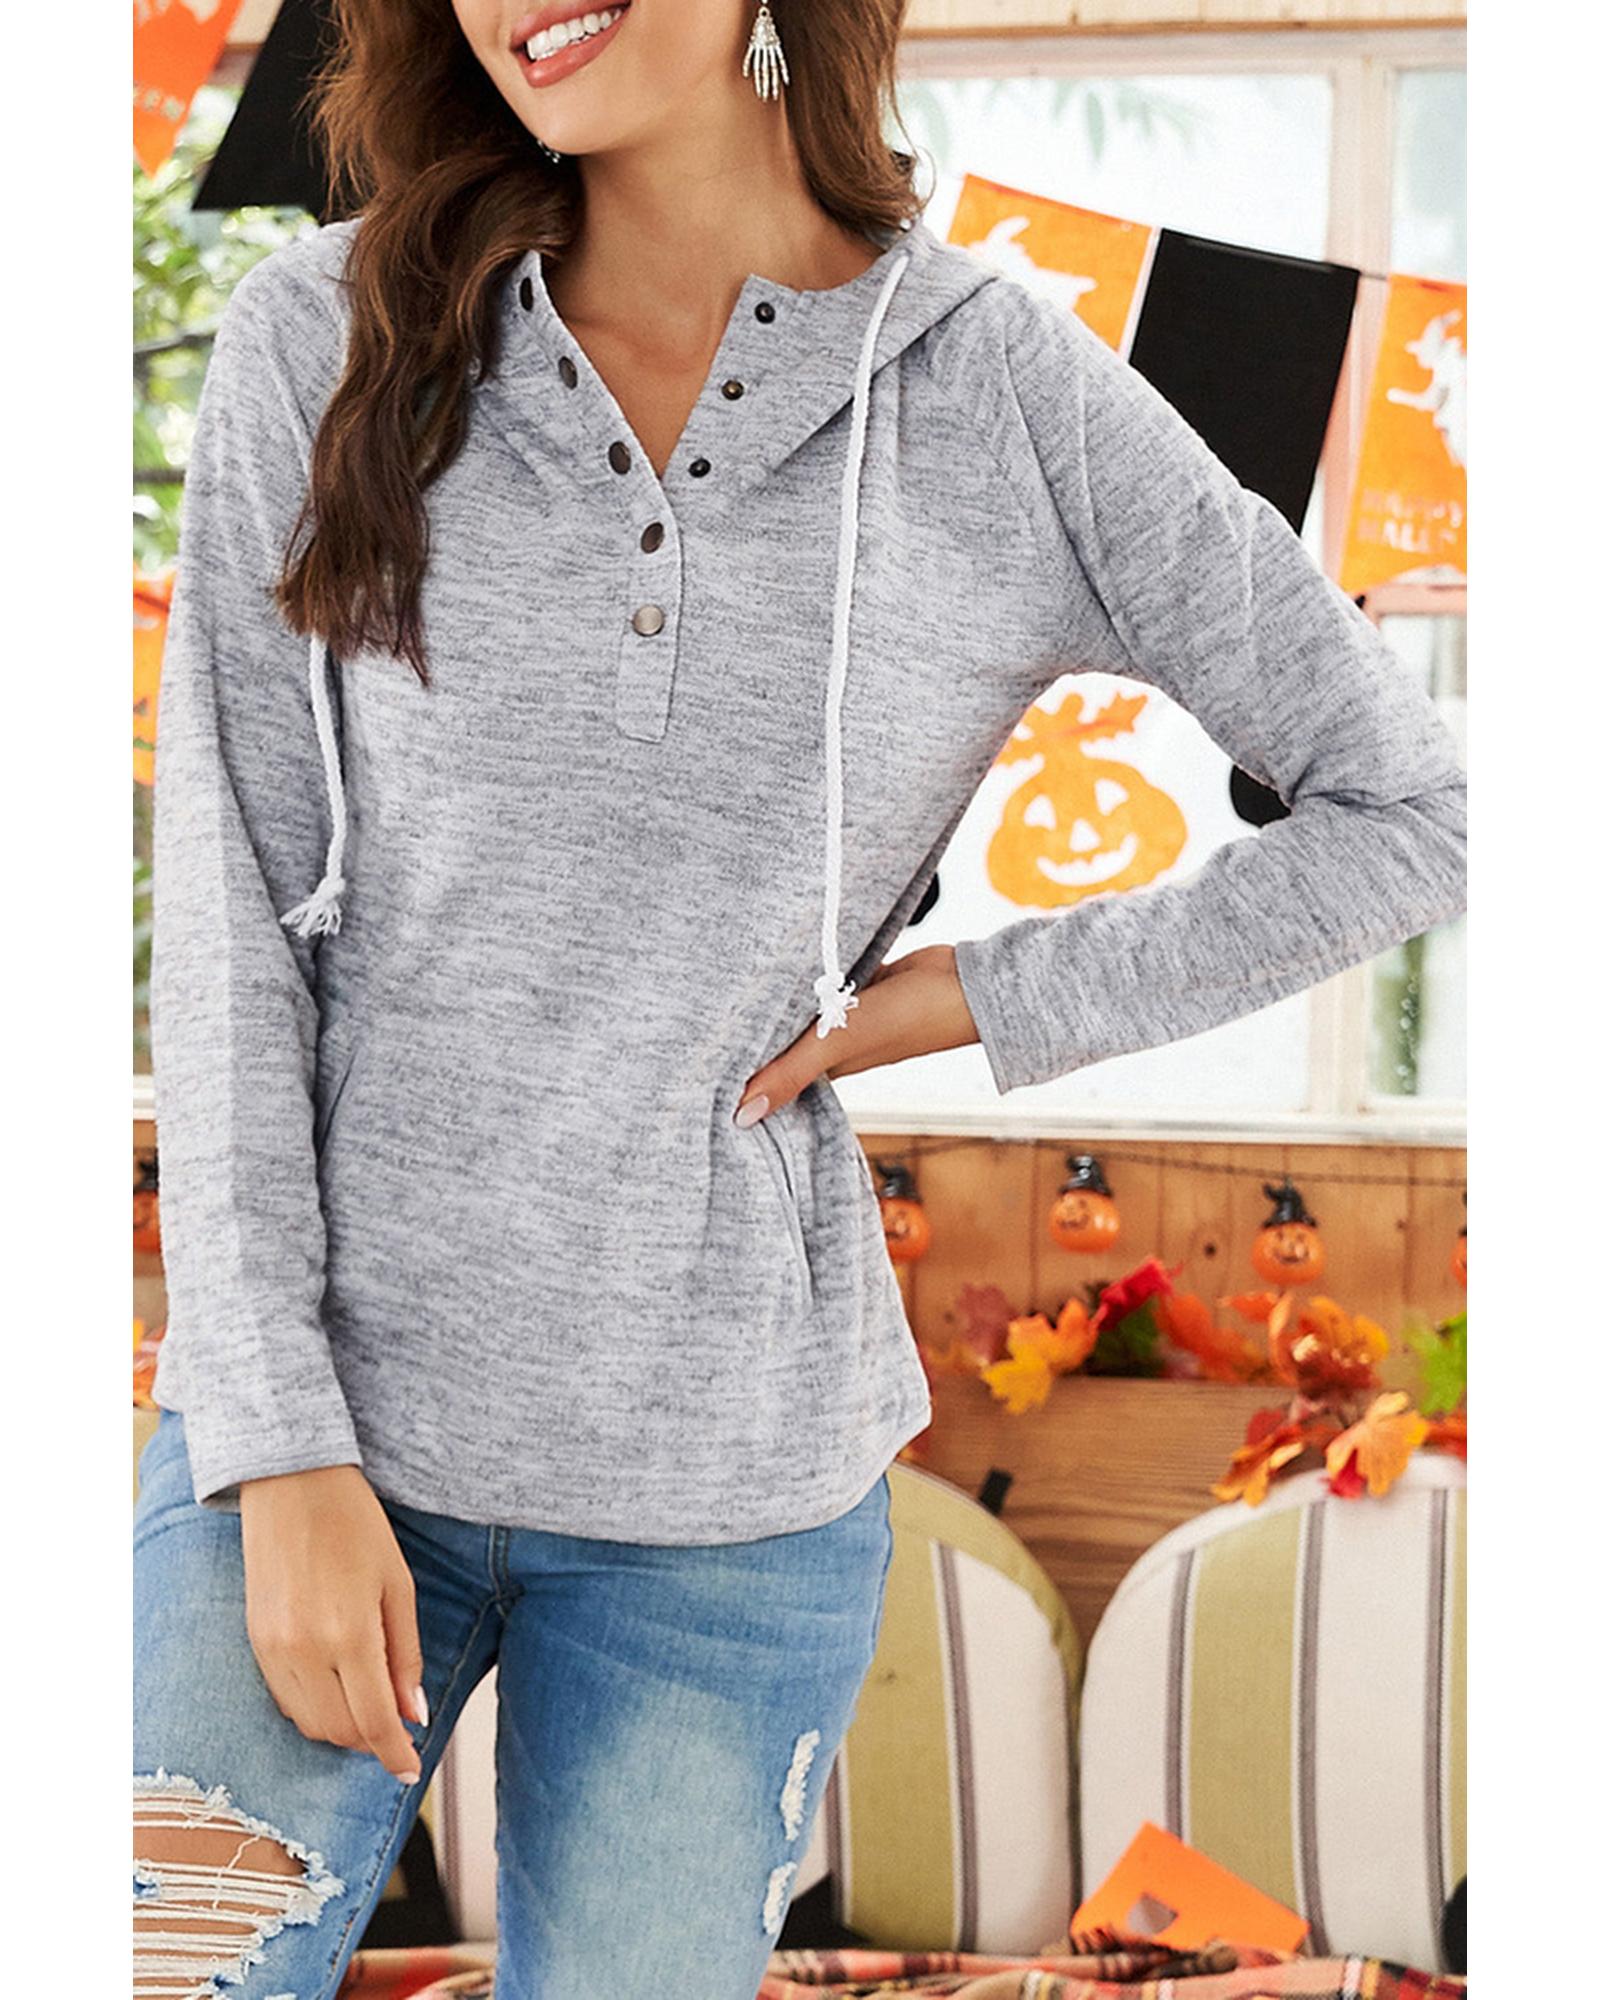 Azura Exchange Buttoned Casual Hoodie with Pocket Design - M